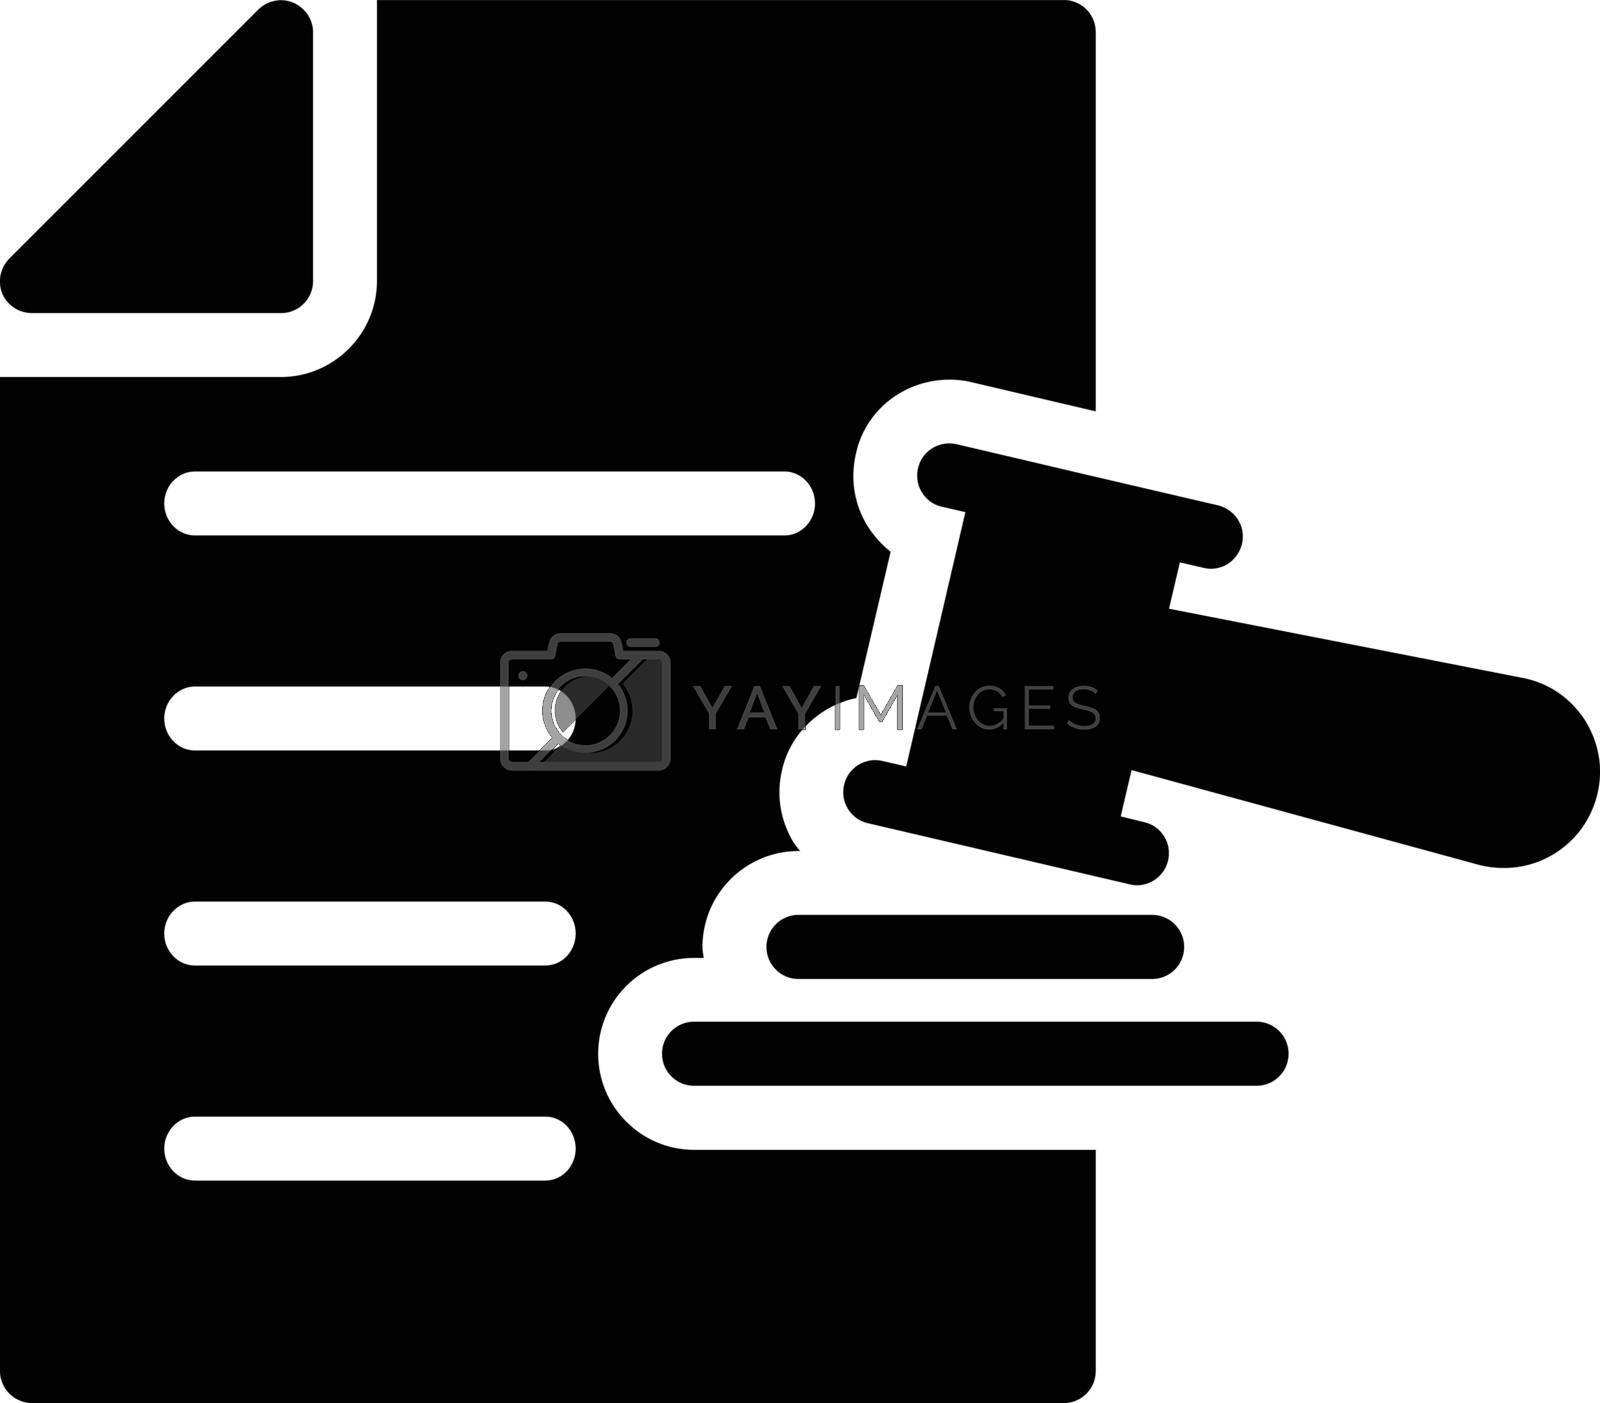 Royalty free image of legal by FlaticonsDesign